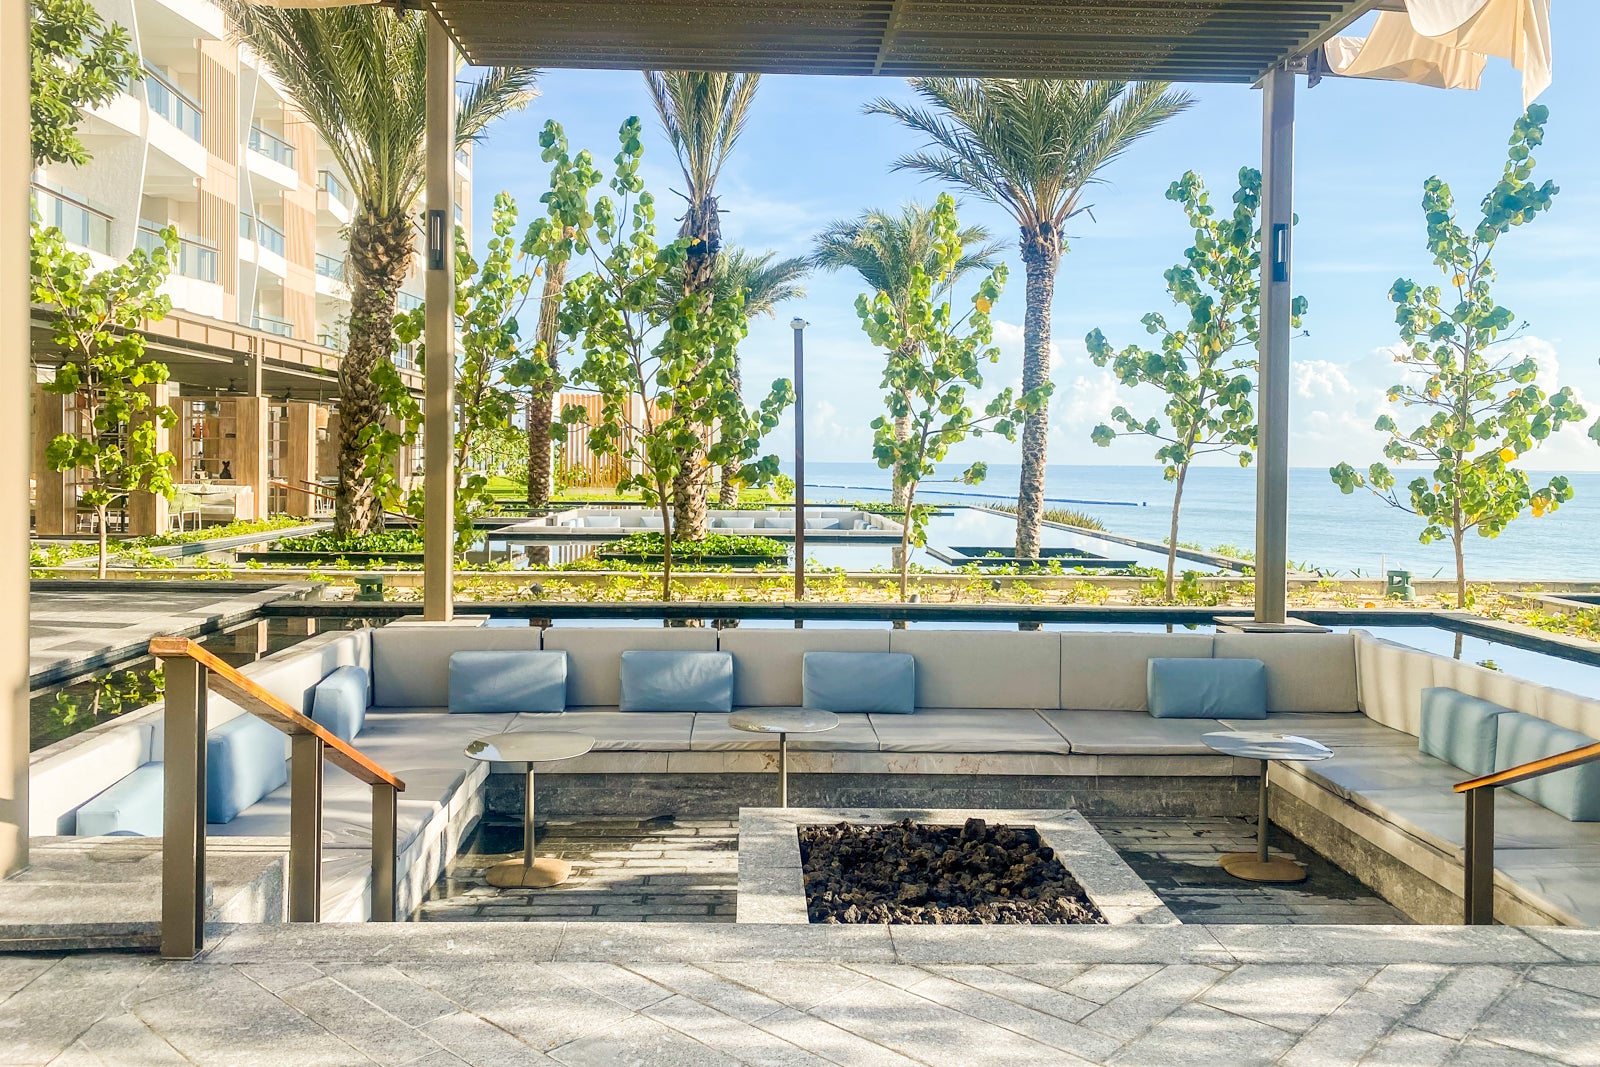 benches surrounded a fire pit with many palm trees nearby, looking out over the ocean